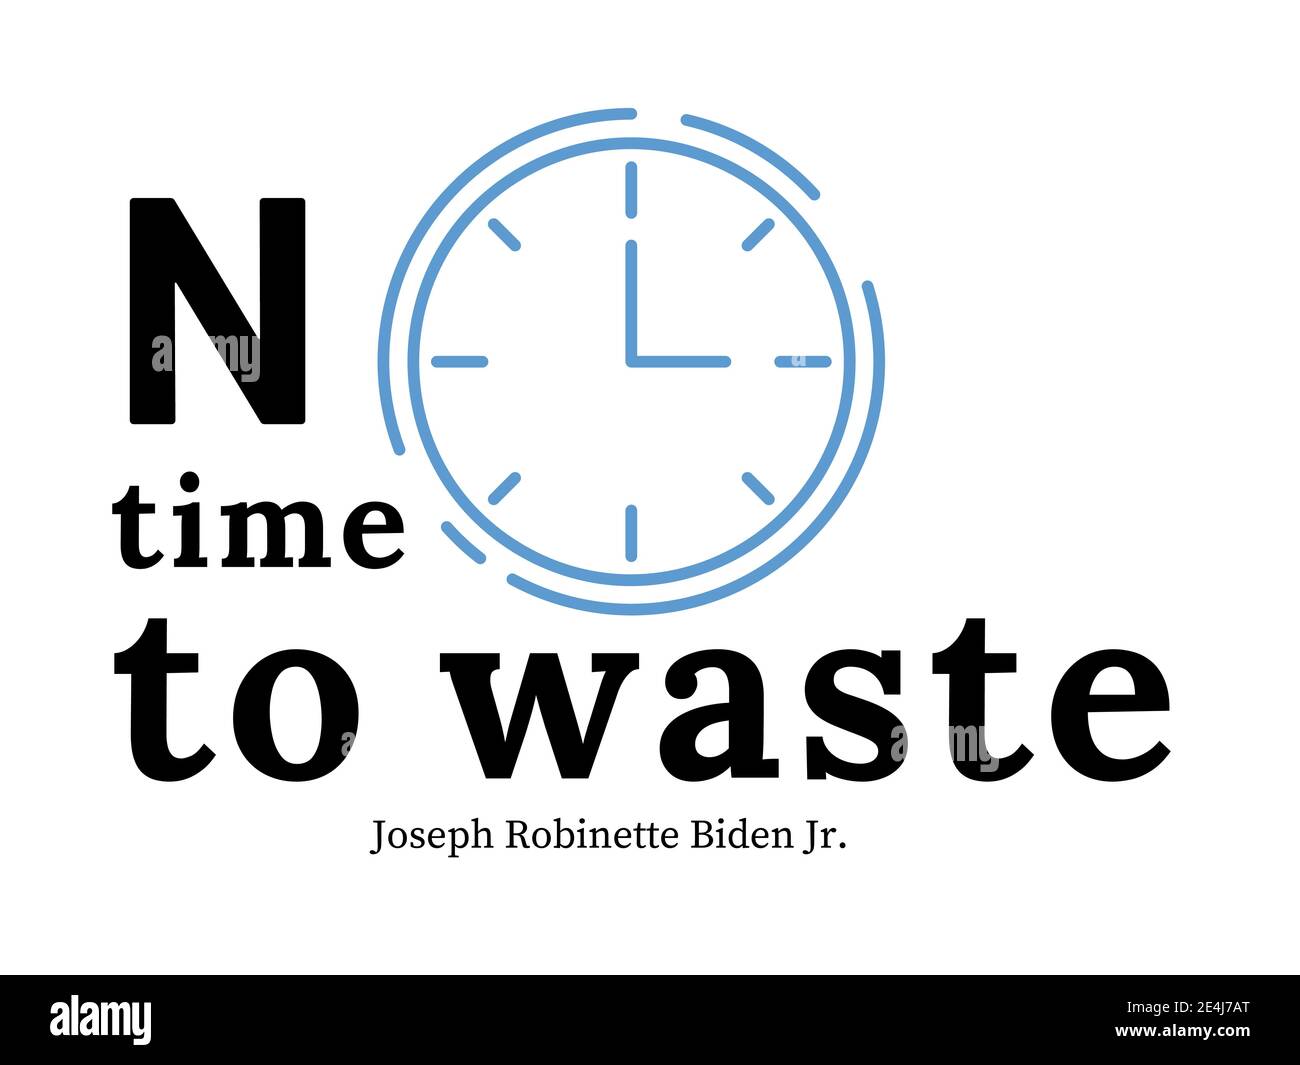 No time to waste, quote of Joe Biden speak in inauguation day on January 20, 2021. Stock Vector